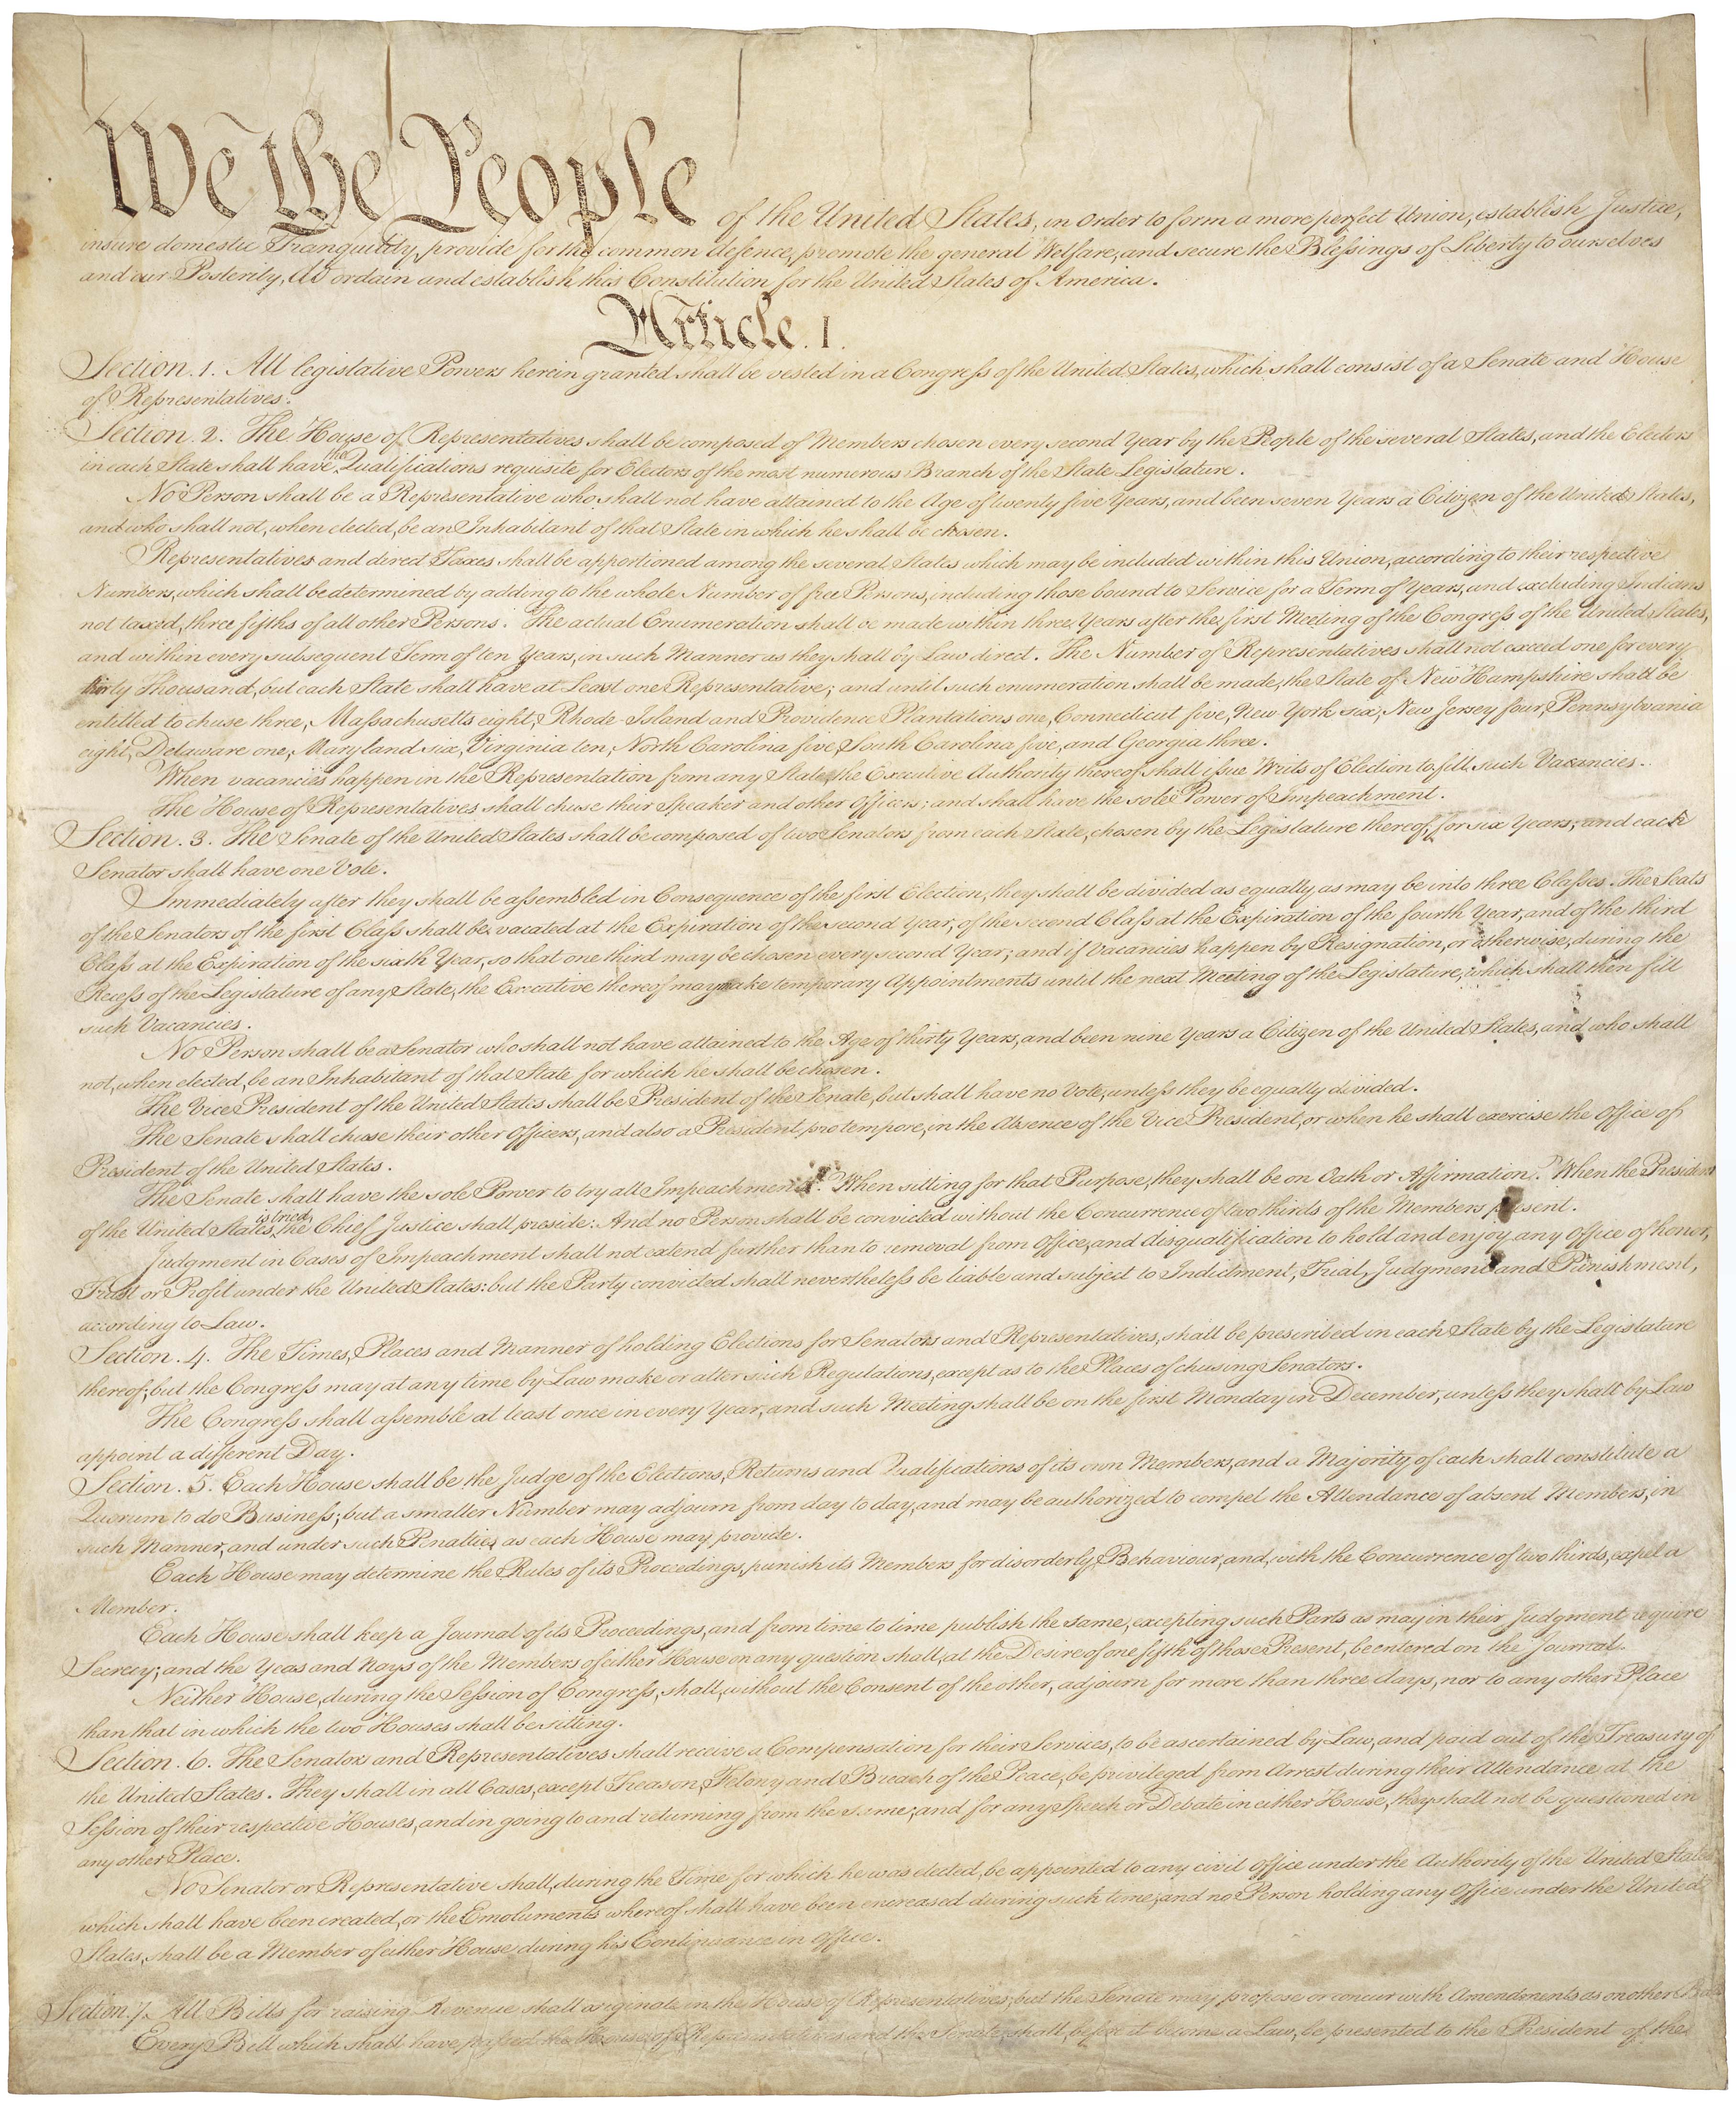 United States Constitution - Page 1 of 4